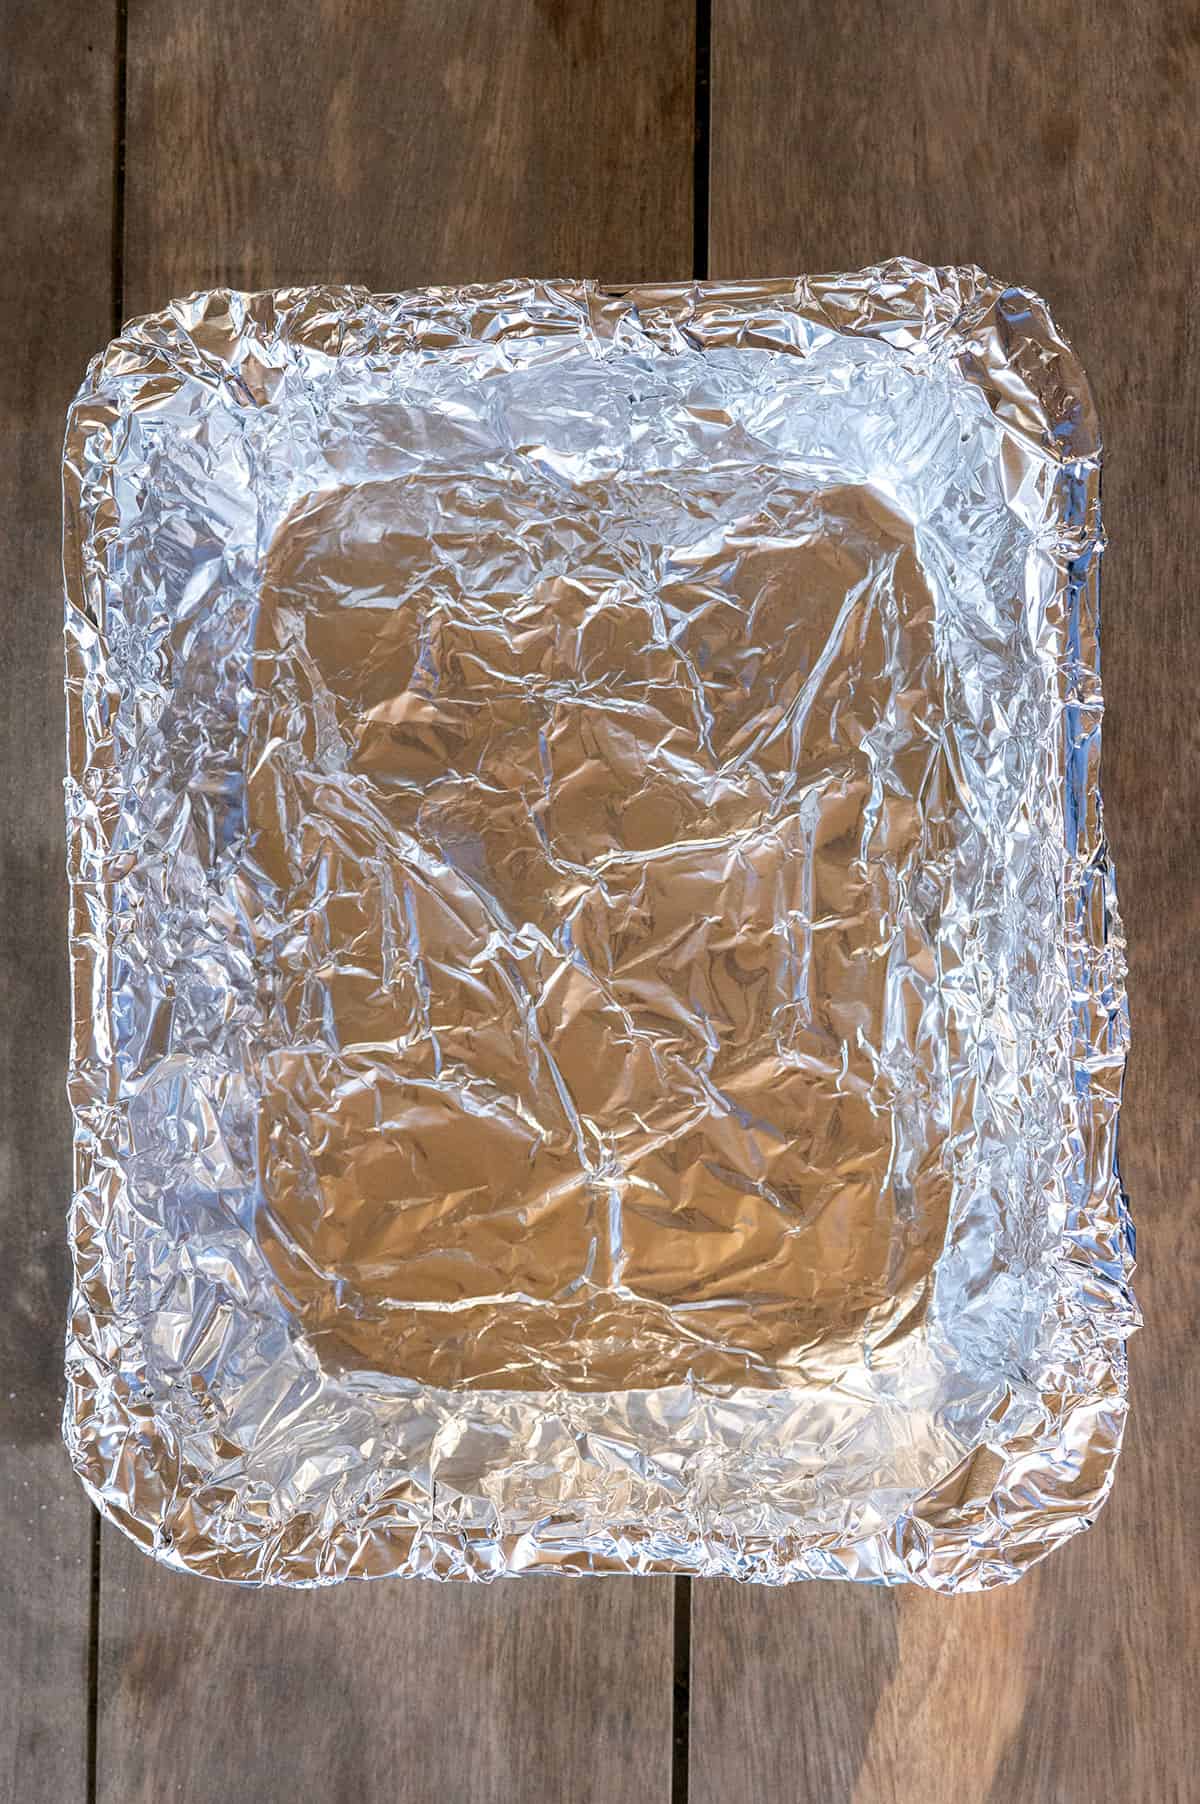 pan lined with foil.